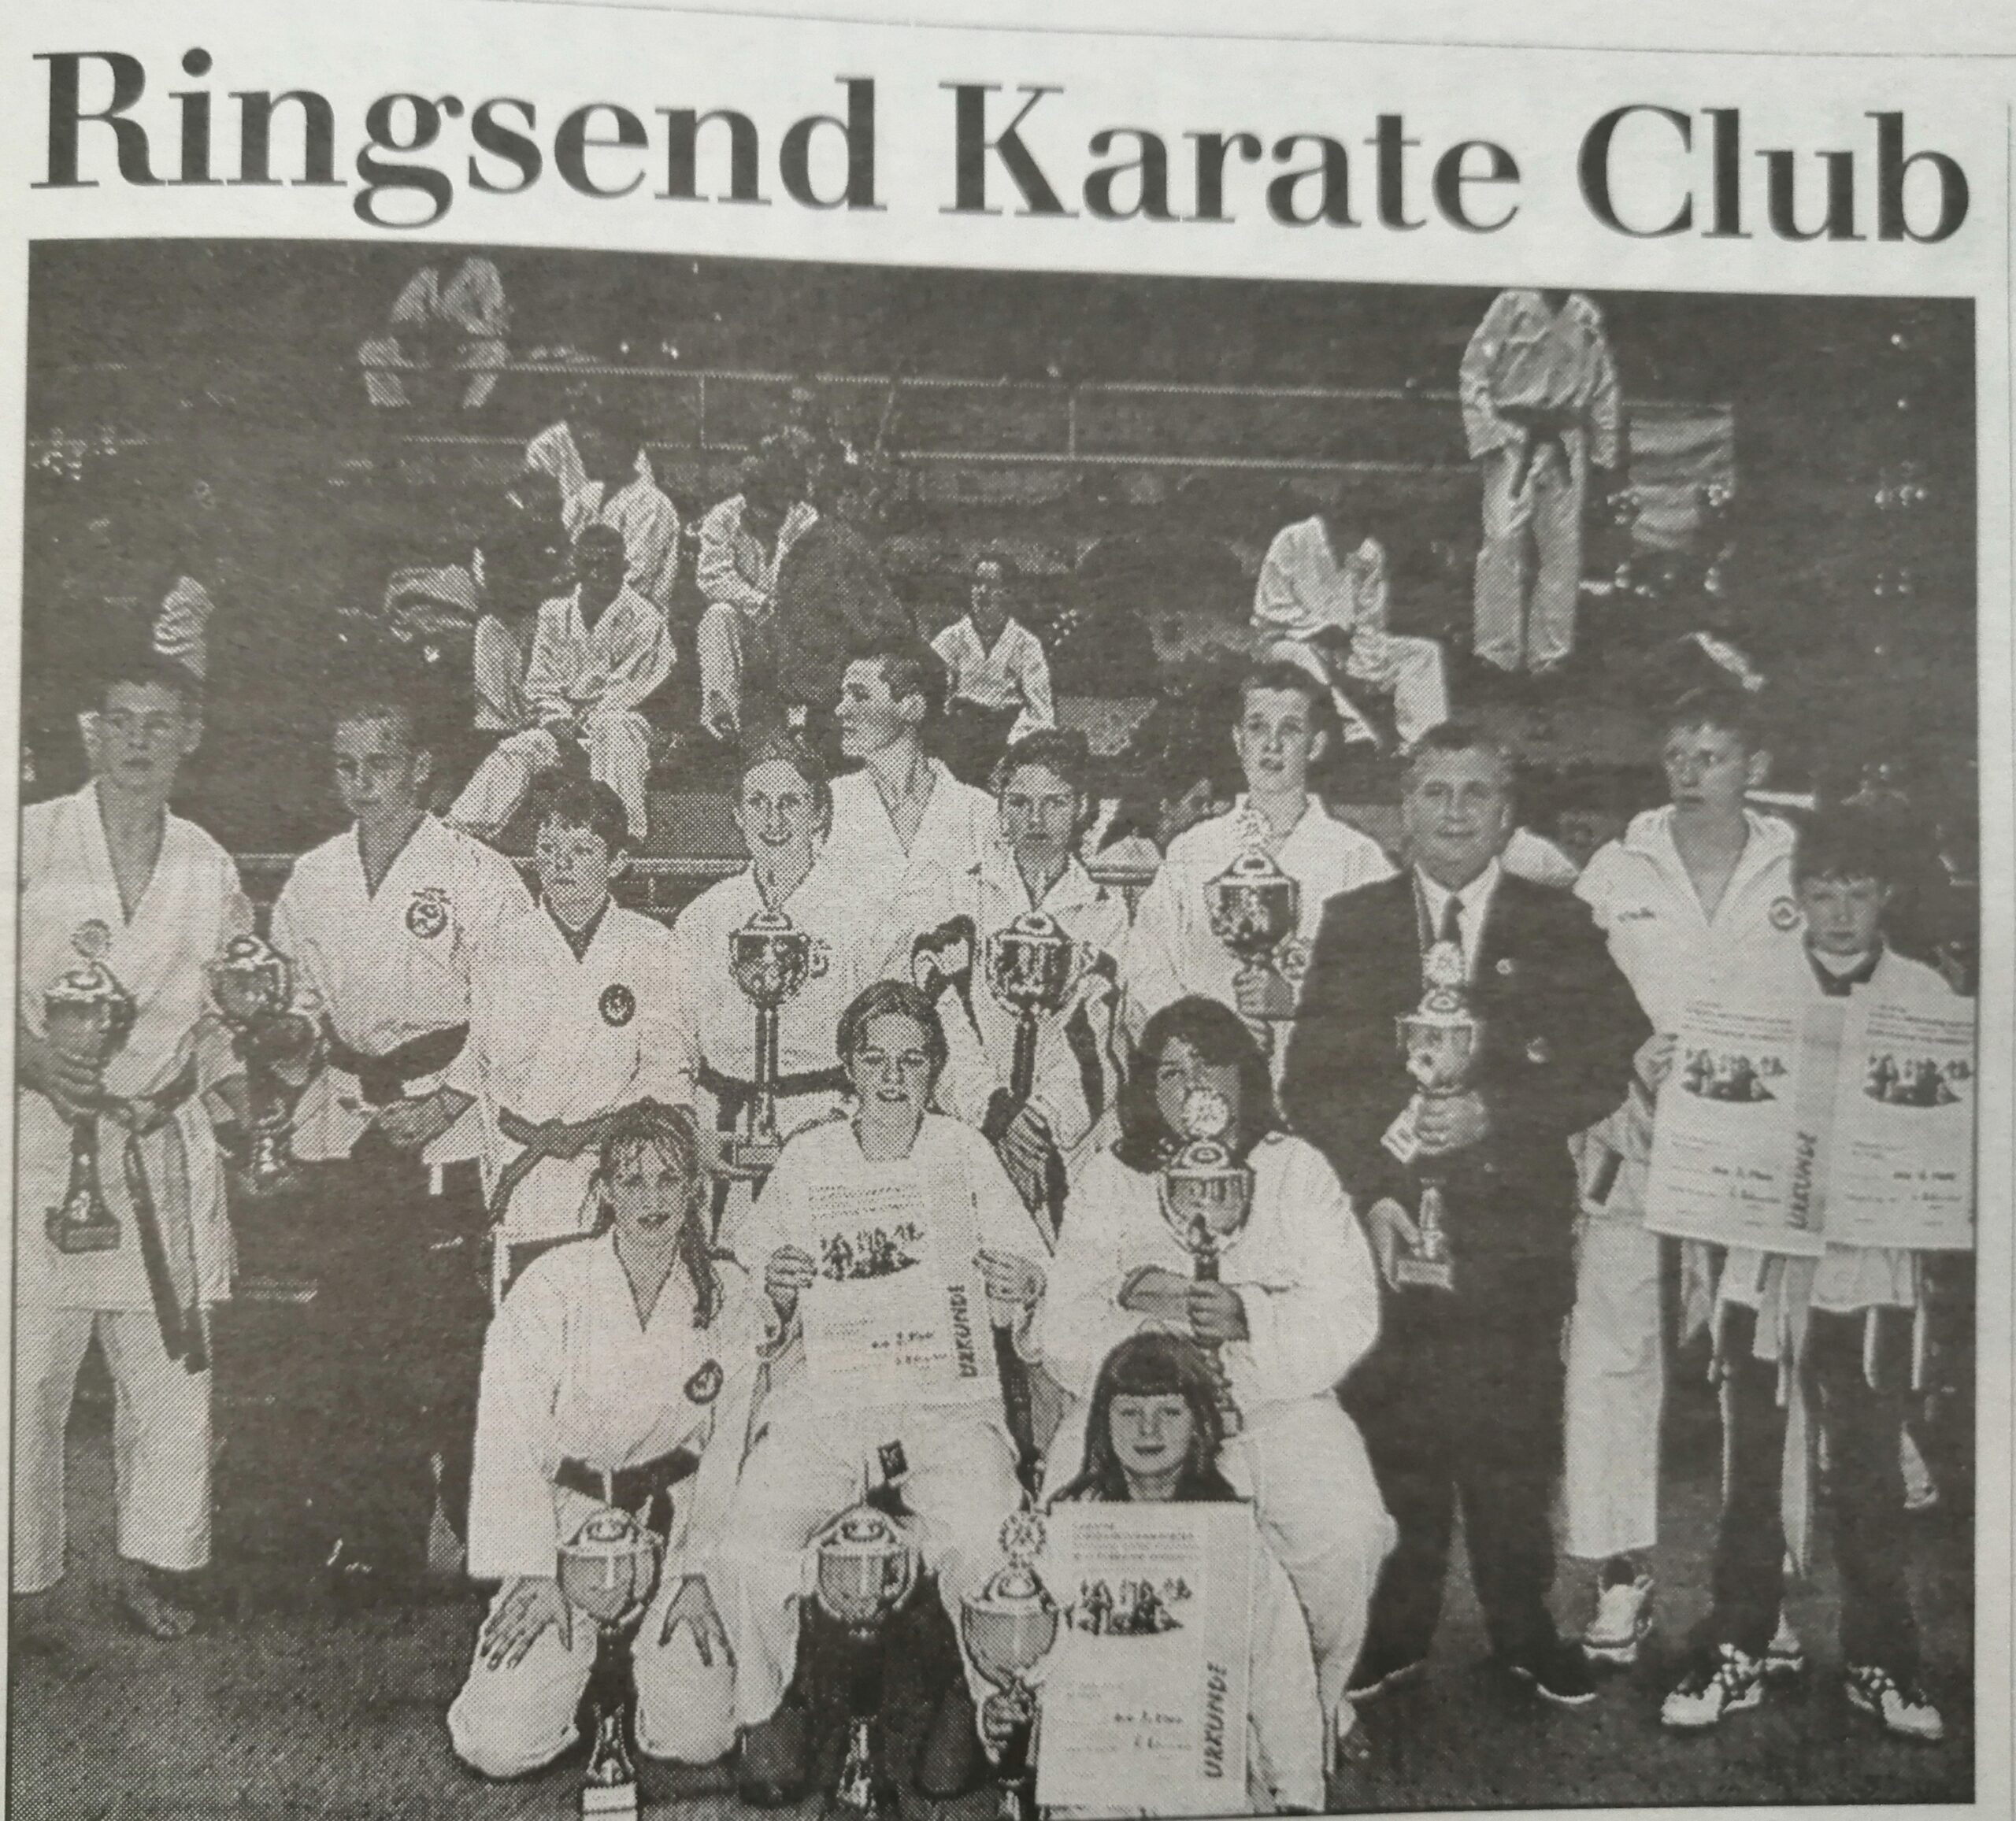 Ringsend Karate Club returned home victorious from a European Championship